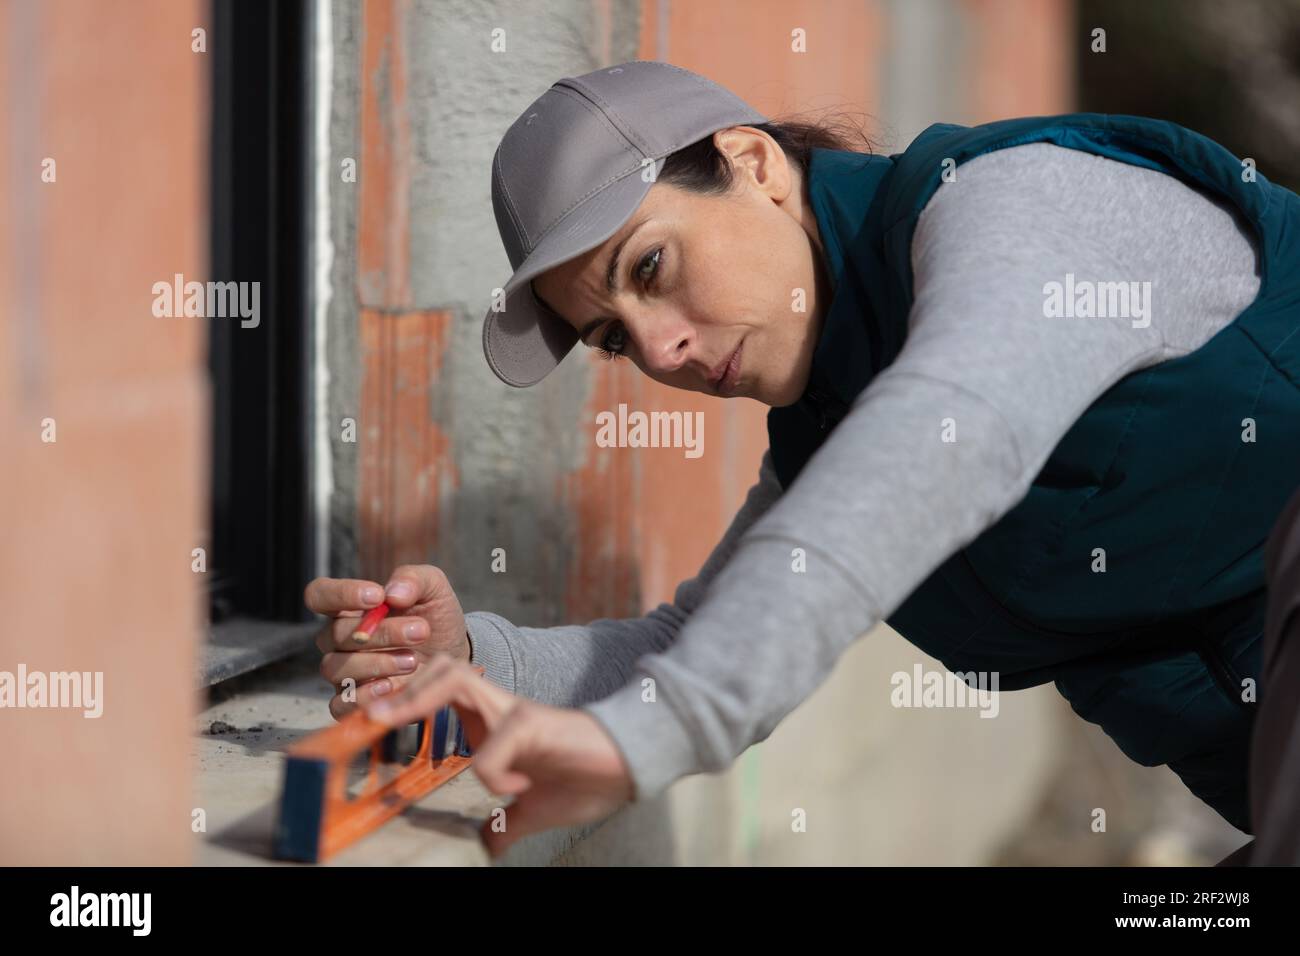 a female builder fixing the window Stock Photo